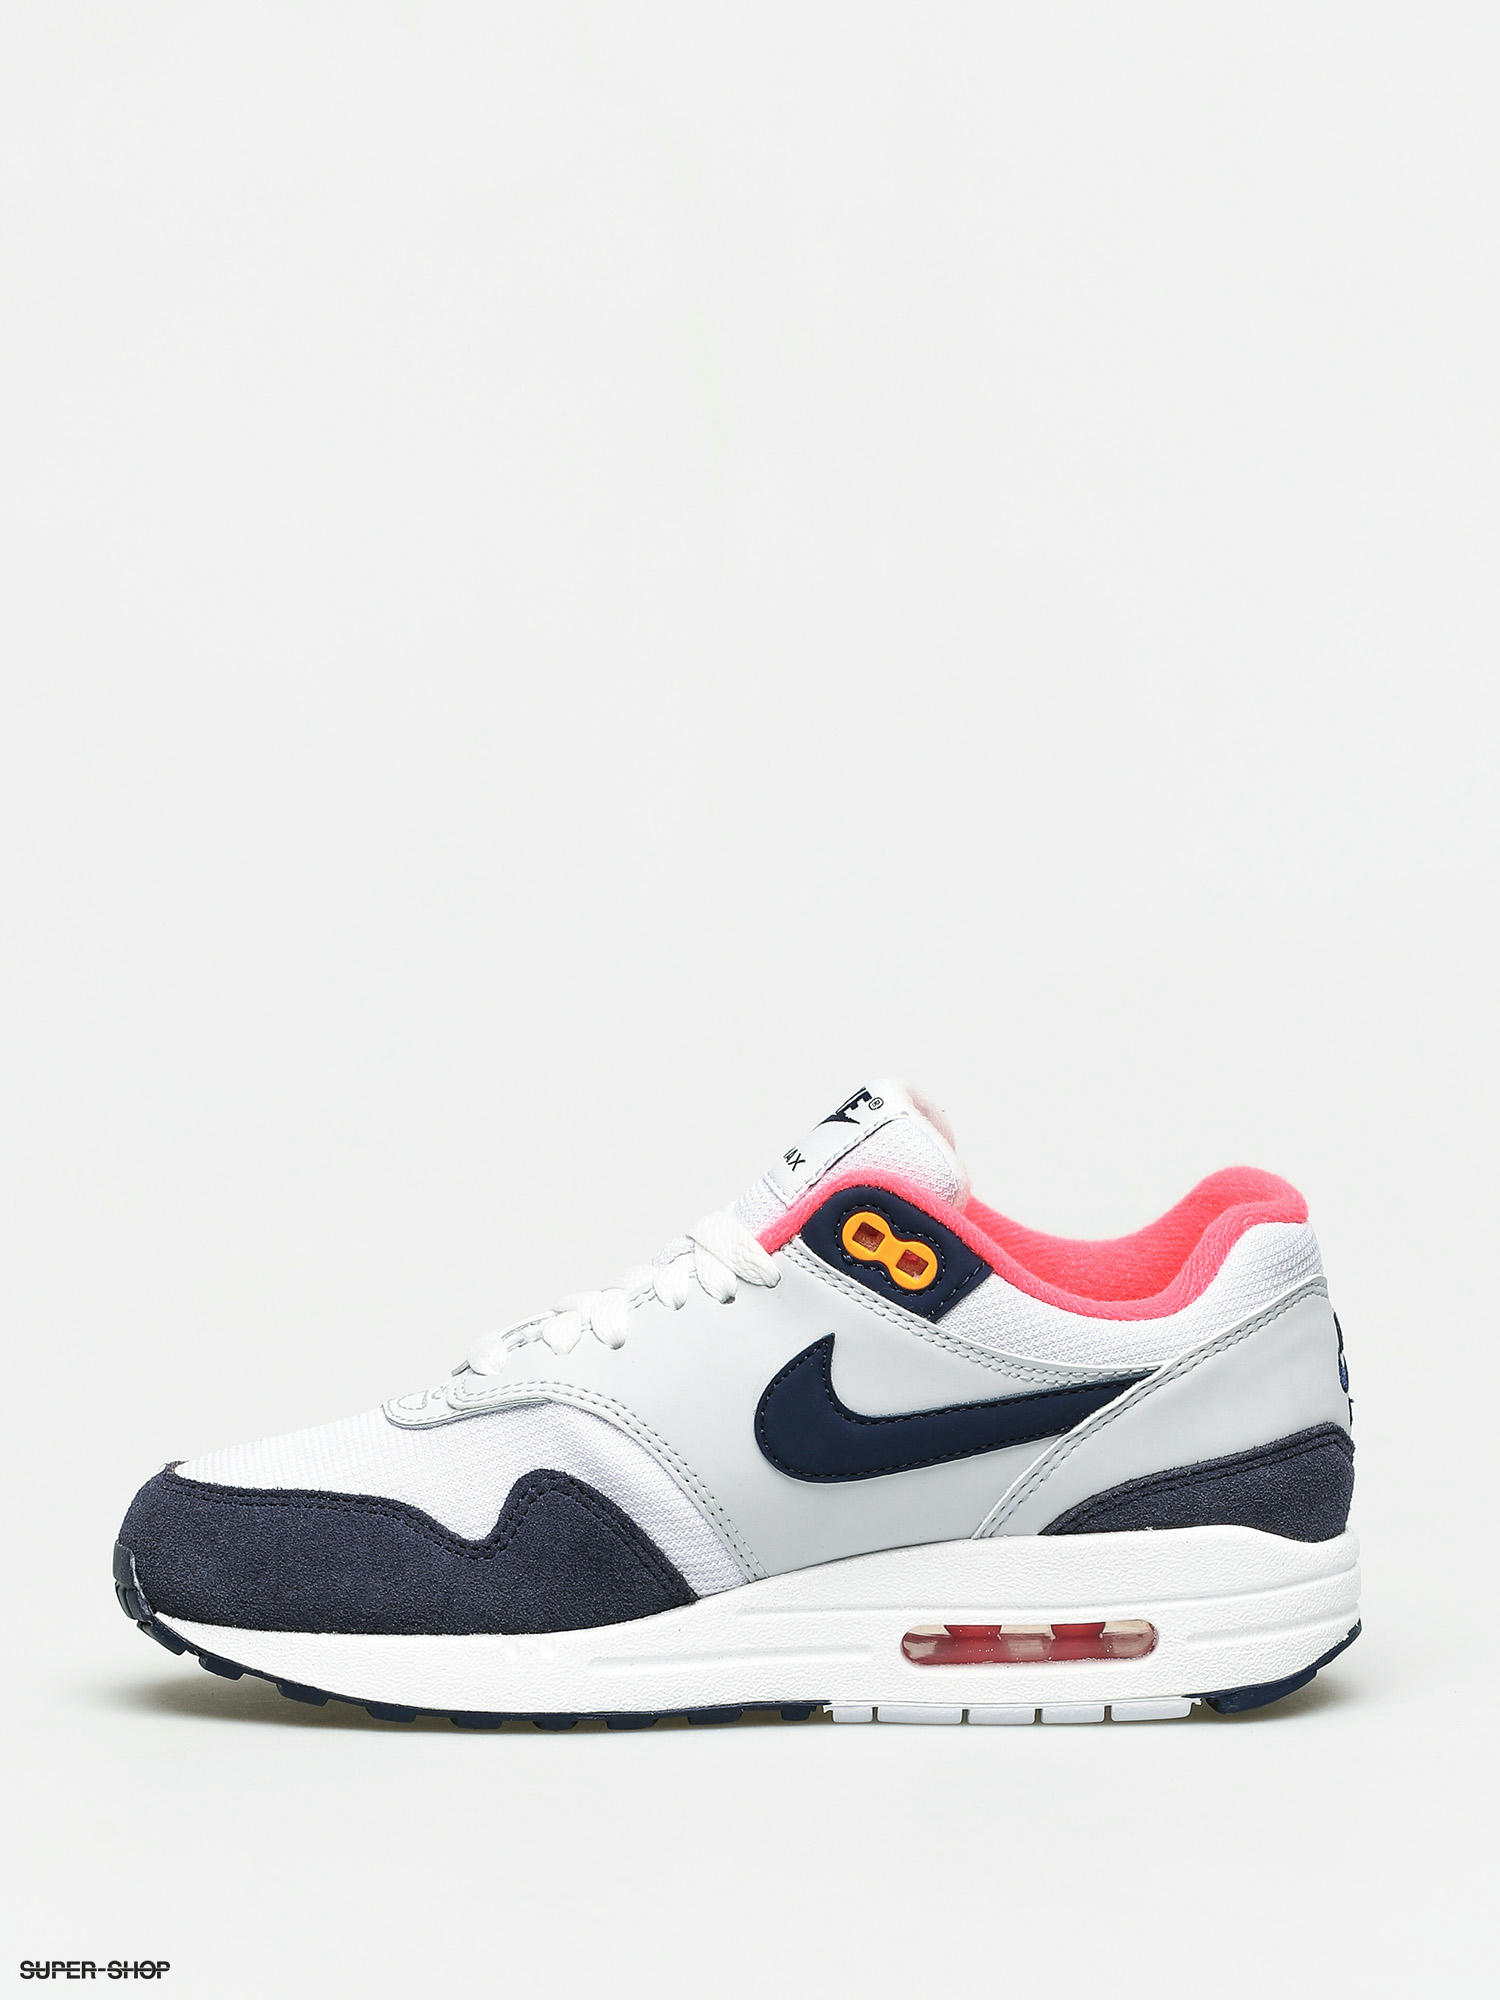 conservatief cultuur Appal Nike Air Max 1 Shoes Wmn (white/midnight navy pure platinum)